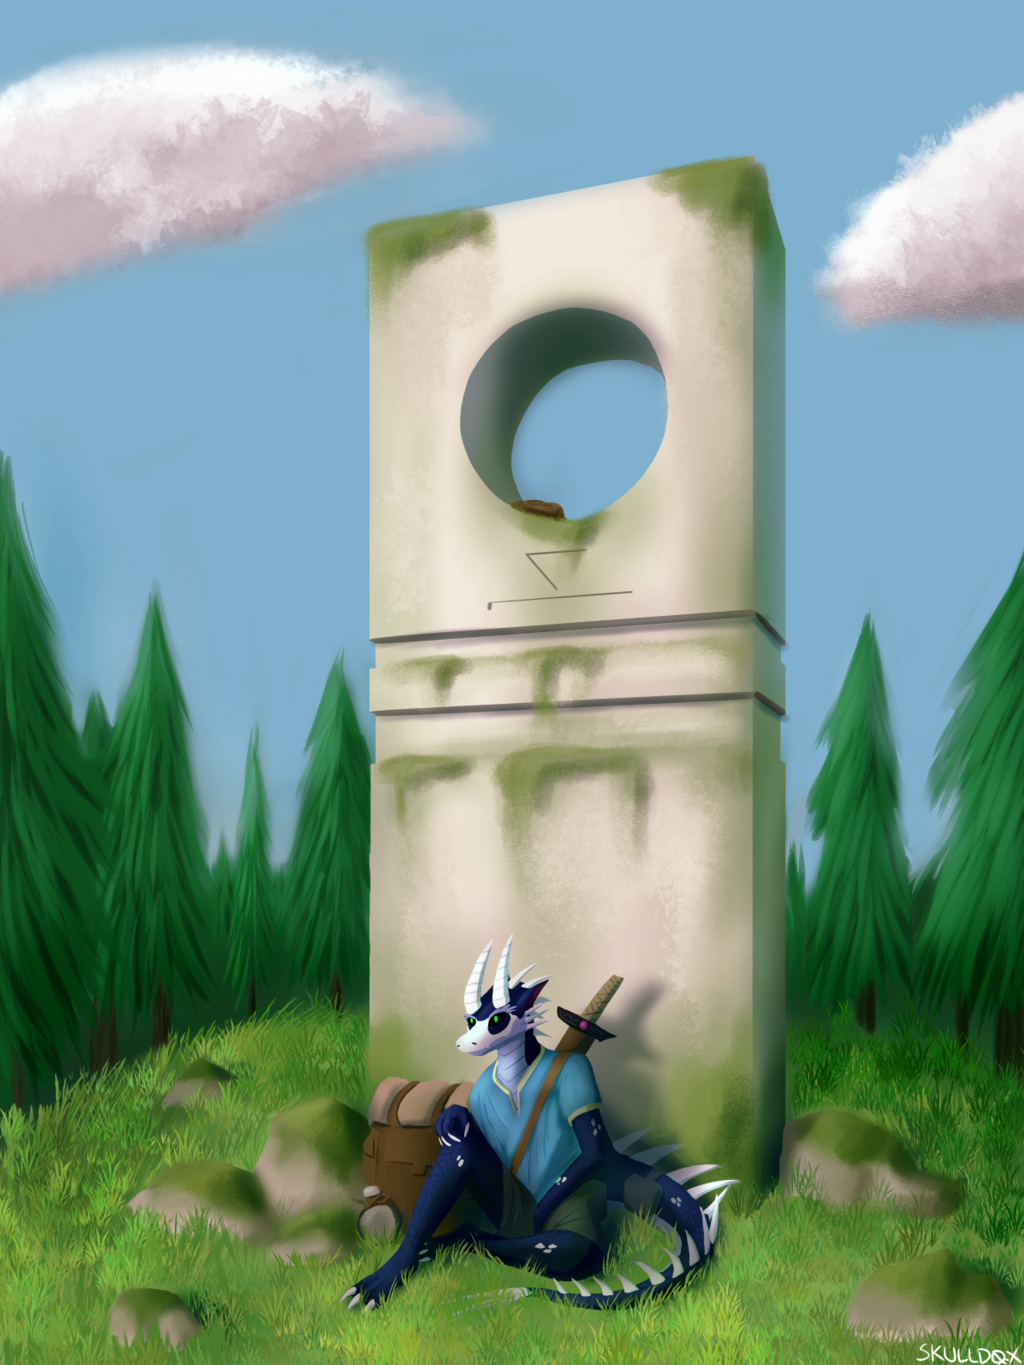 Resting by the Monolith